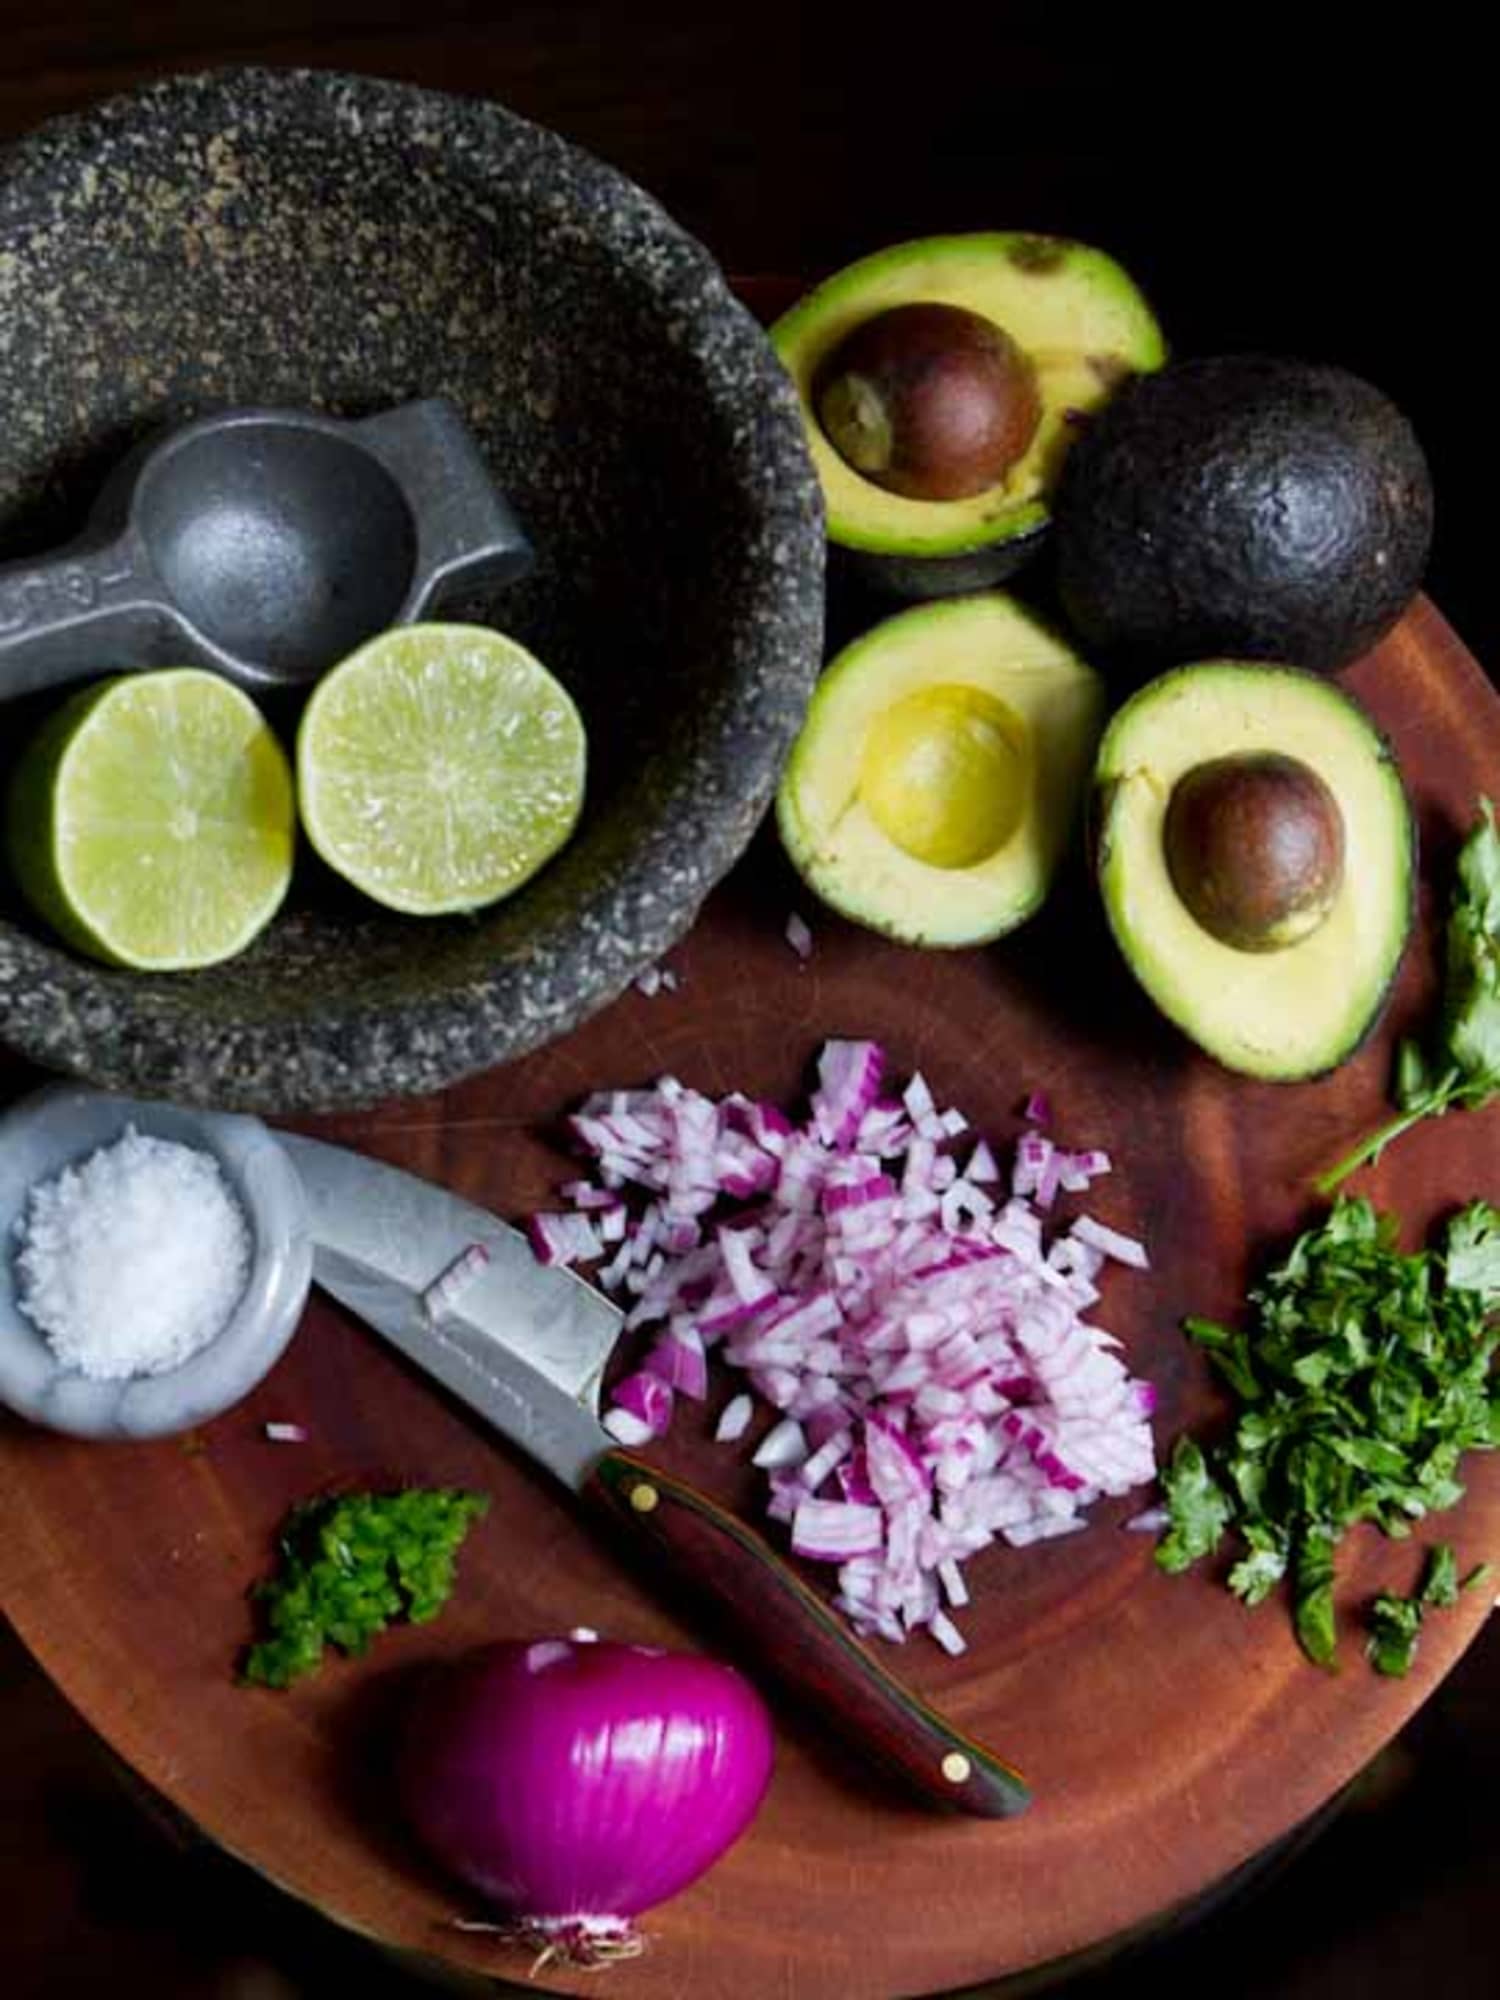 12 Reasons to Be Grateful for Mexico & the Food It Gave Us